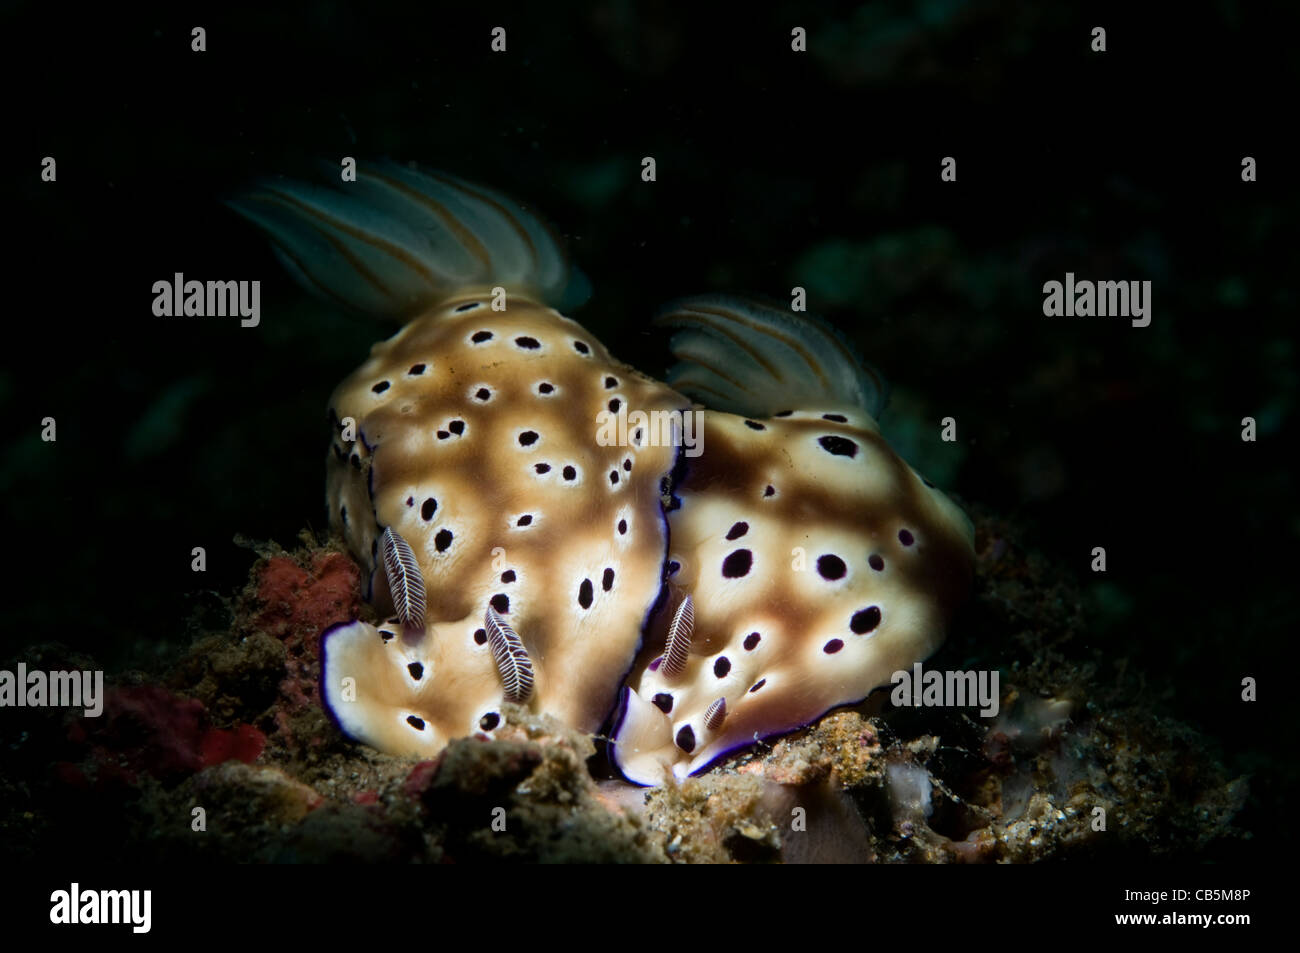 Two Risbecia tryoni nudibranches, Lembeh Strait, Manado, North Sulawesi, Indonesia, Pacific Ocean Stock Photo